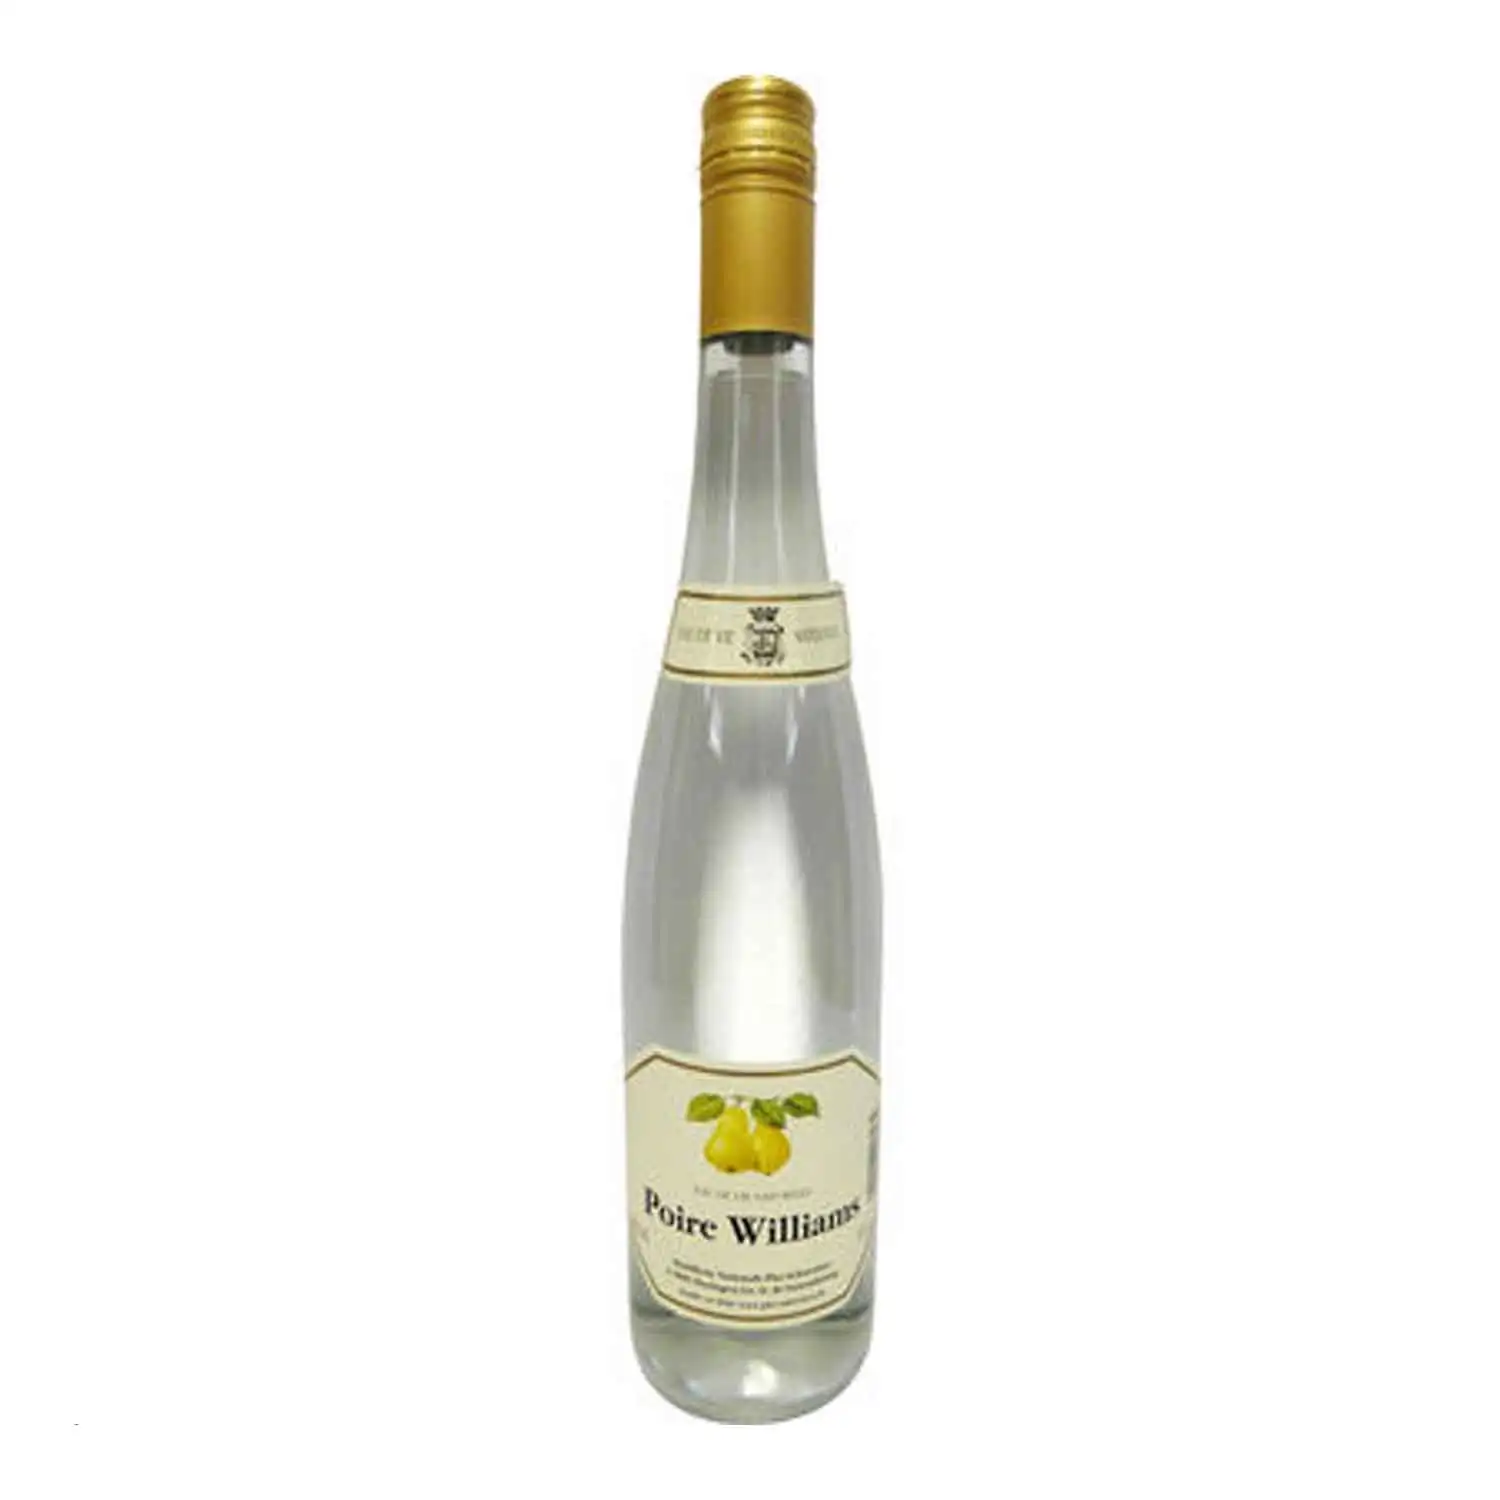 Poire Williams 70cl Alc 40% - Buy at Real Tobacco